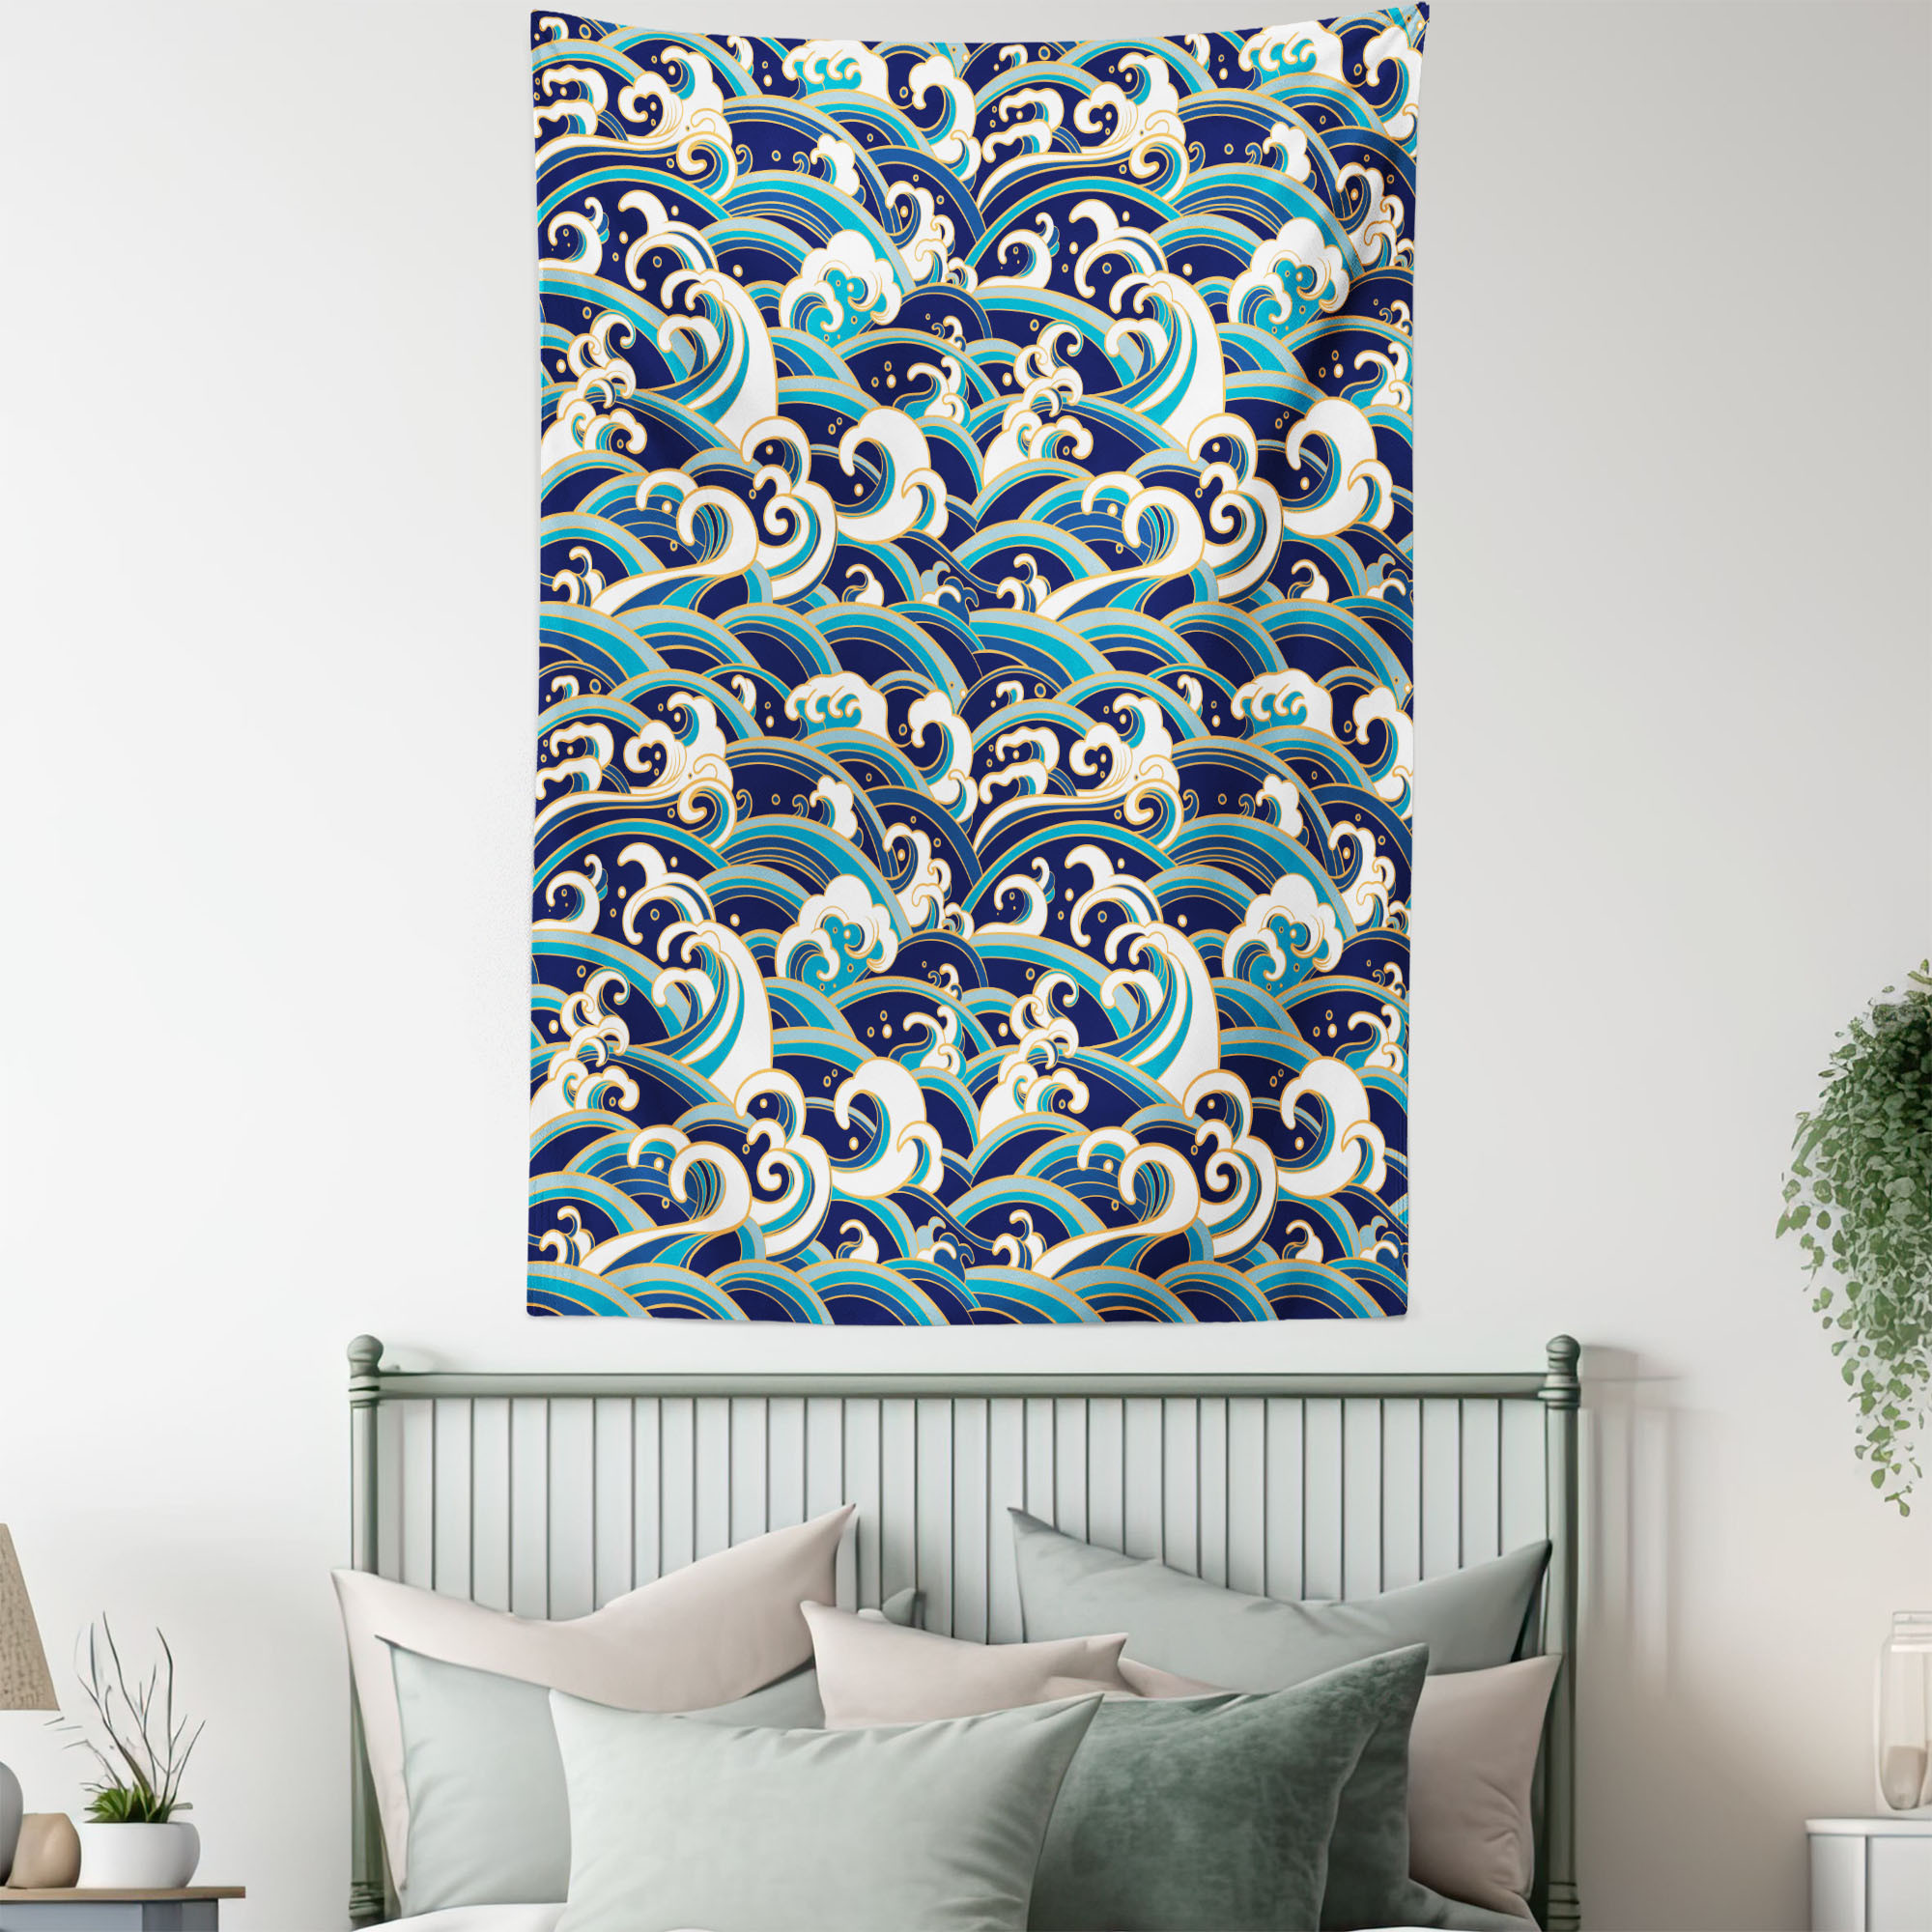 Nautical Tapestry, Traditional Oriental Style Ocean Waves Pattern with Foam and Splashes Print, Wall Hanging for Bedroom Living Room Dorm Decor, 40W X 60L Inches, Blue and White, by Ambesonne - image 4 of 5